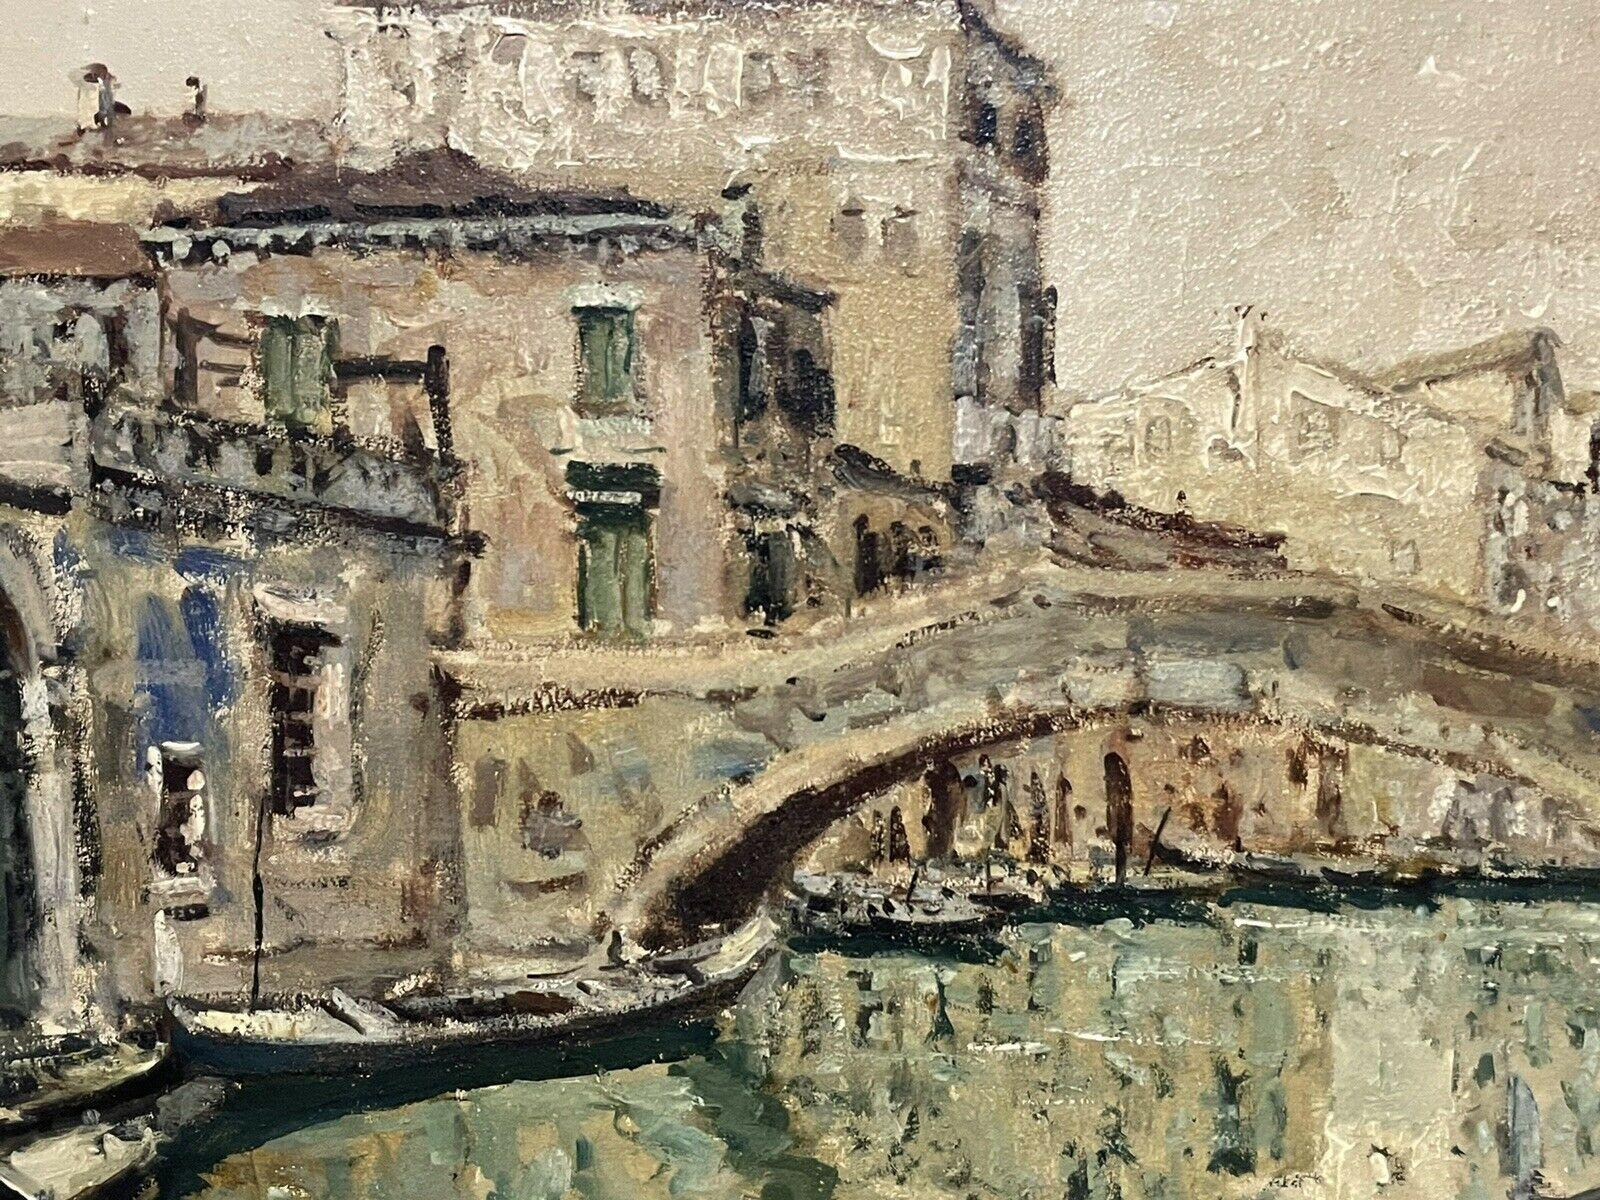 VERY LARGE 1960'S ITALIAN SIGNED OIL - MOODY IMPRESSIONIST VENICE CANAL SCENE - Impressionist Painting by Italian Signed